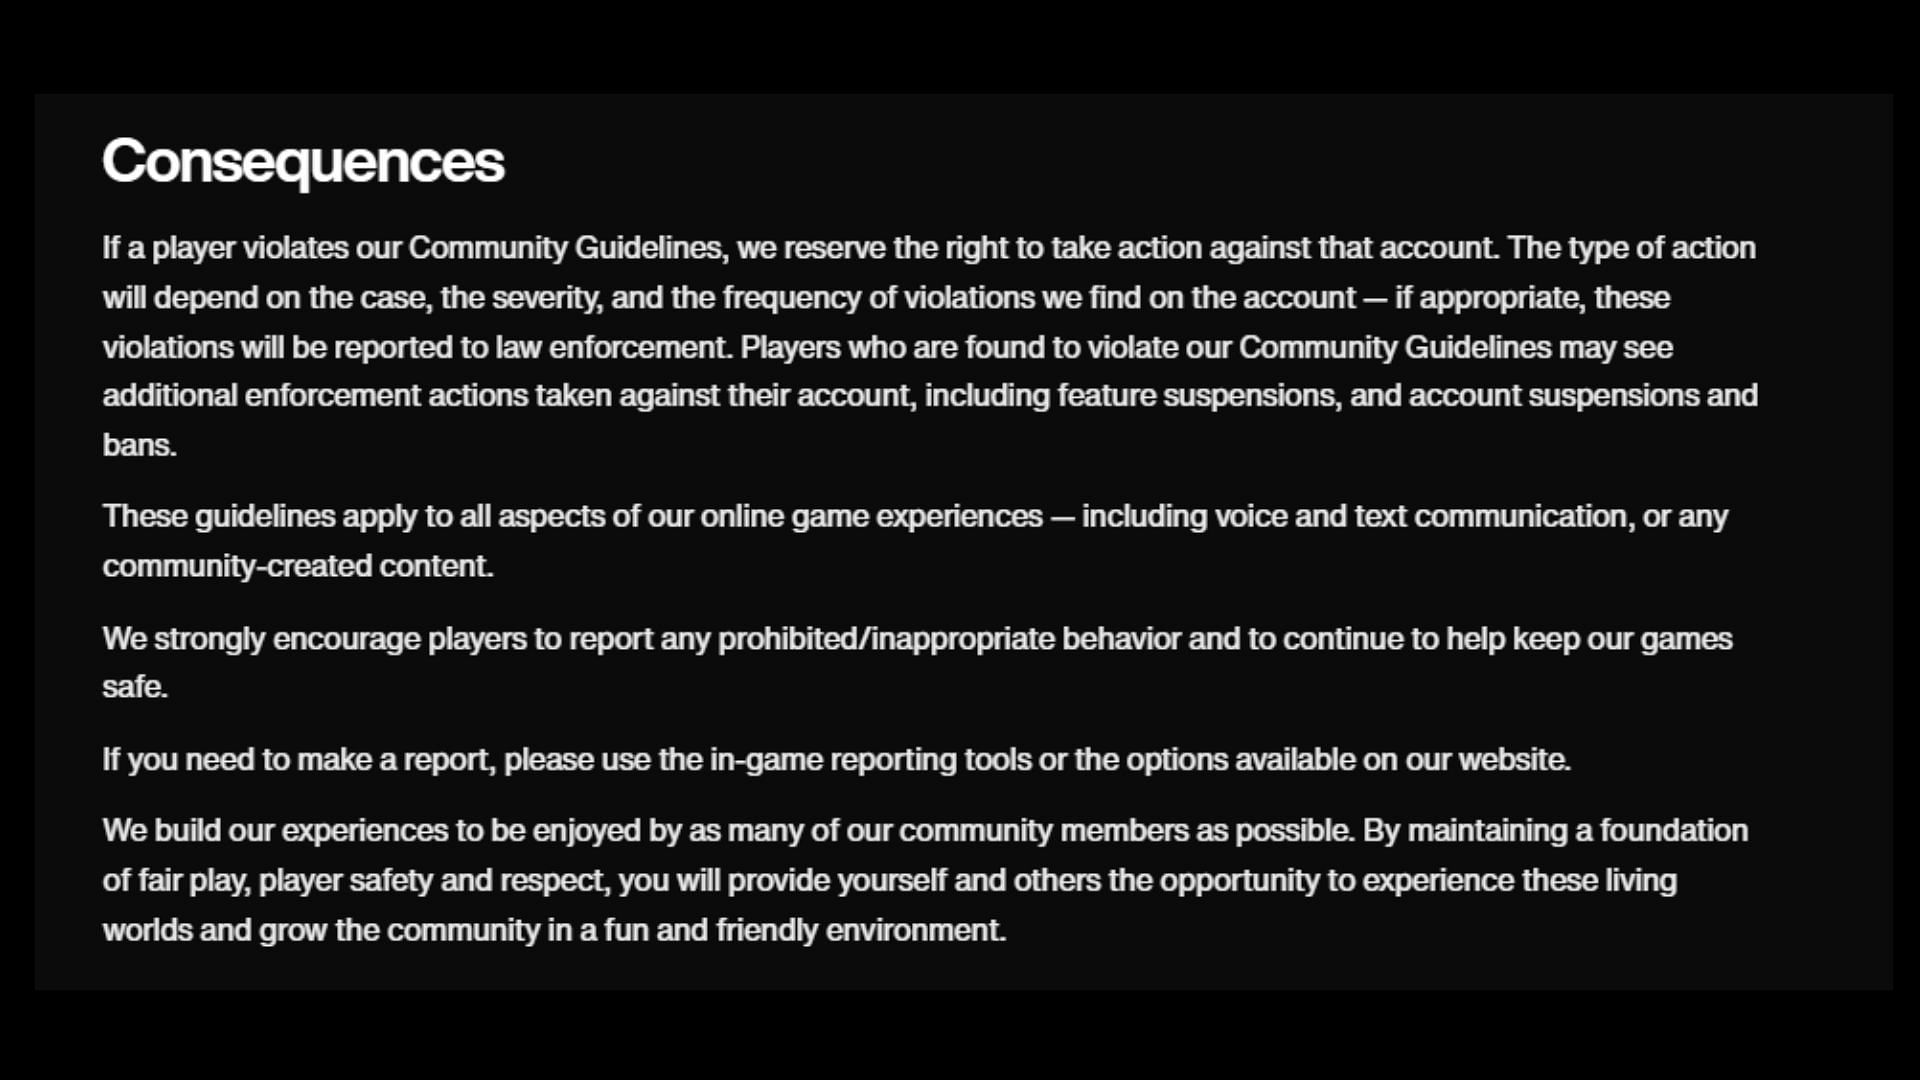 Consequences for violating guidelines (Image via Rockstar Games)